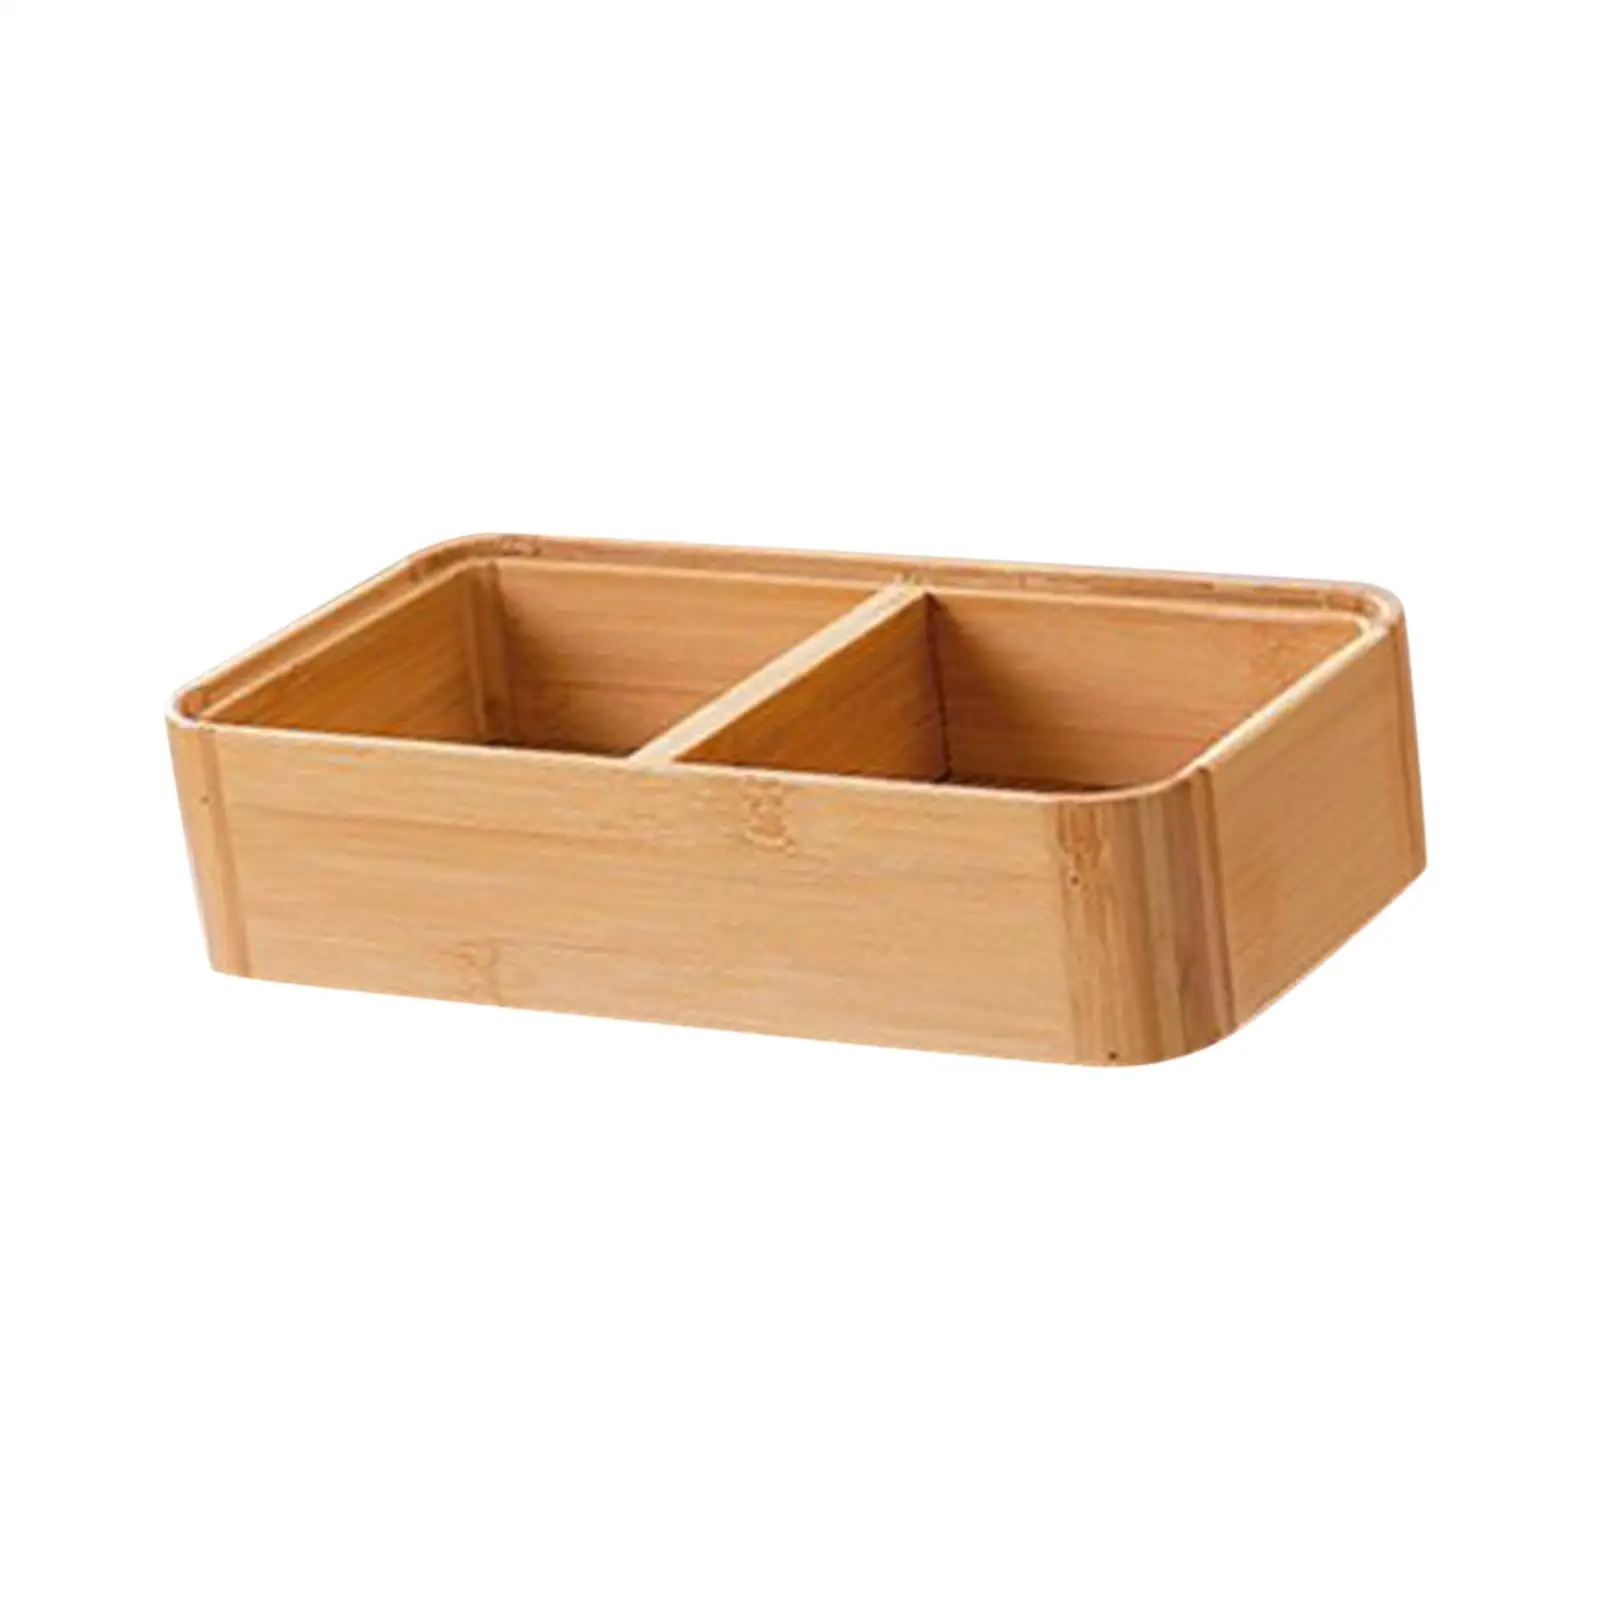 Divided Serving Tray Candy Bowl with Dividers Bamboo Nut and Candy Serving Tray for Holidays Caterers Dips Cured Meat Chips